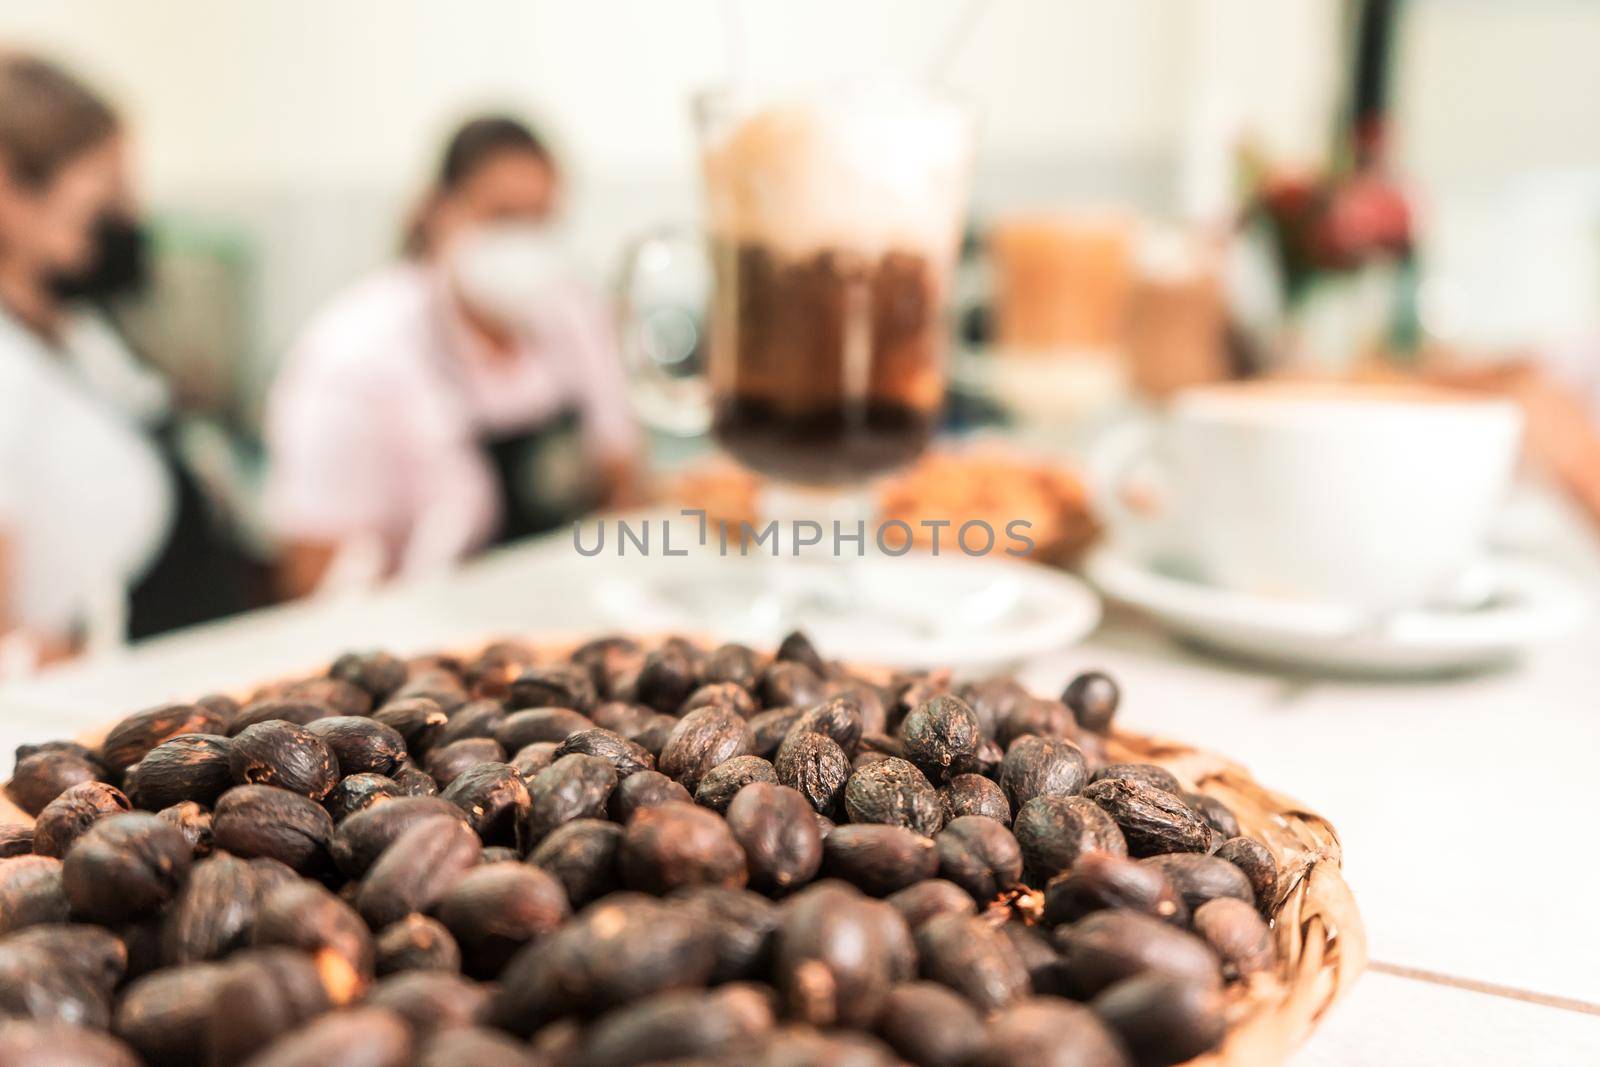 Roasted black coffee beans in a cafeteria with the background out of focus where the bar workers are